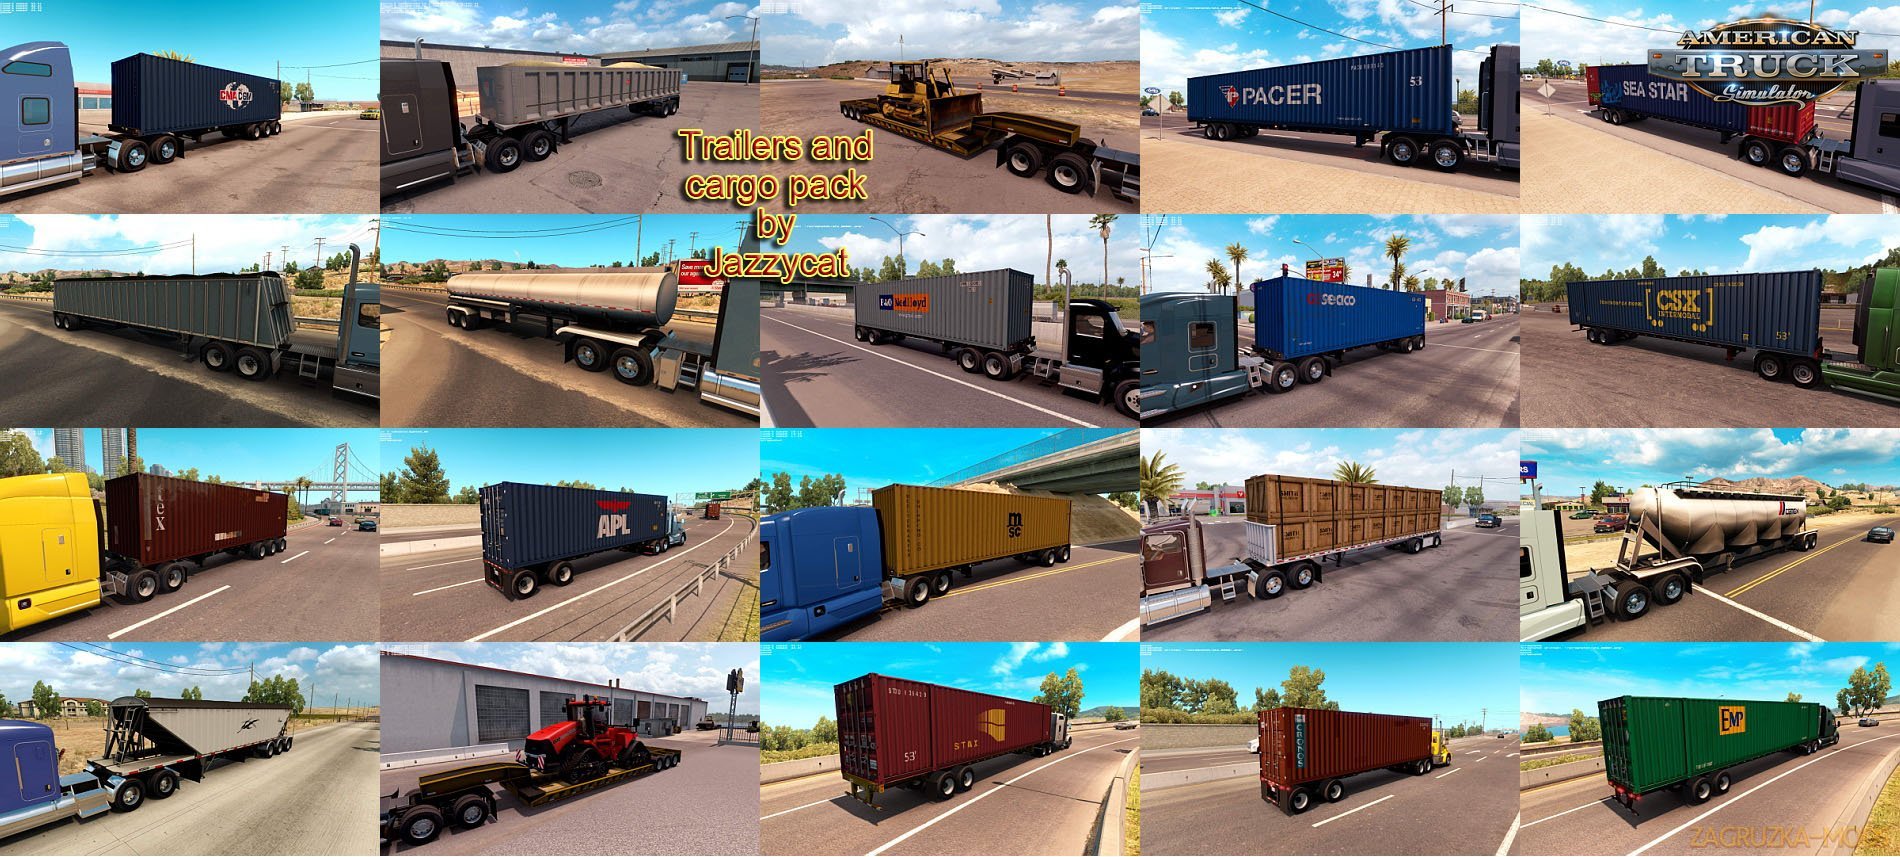 Trailers and Cargo Pack v1.5 by Jazzycat